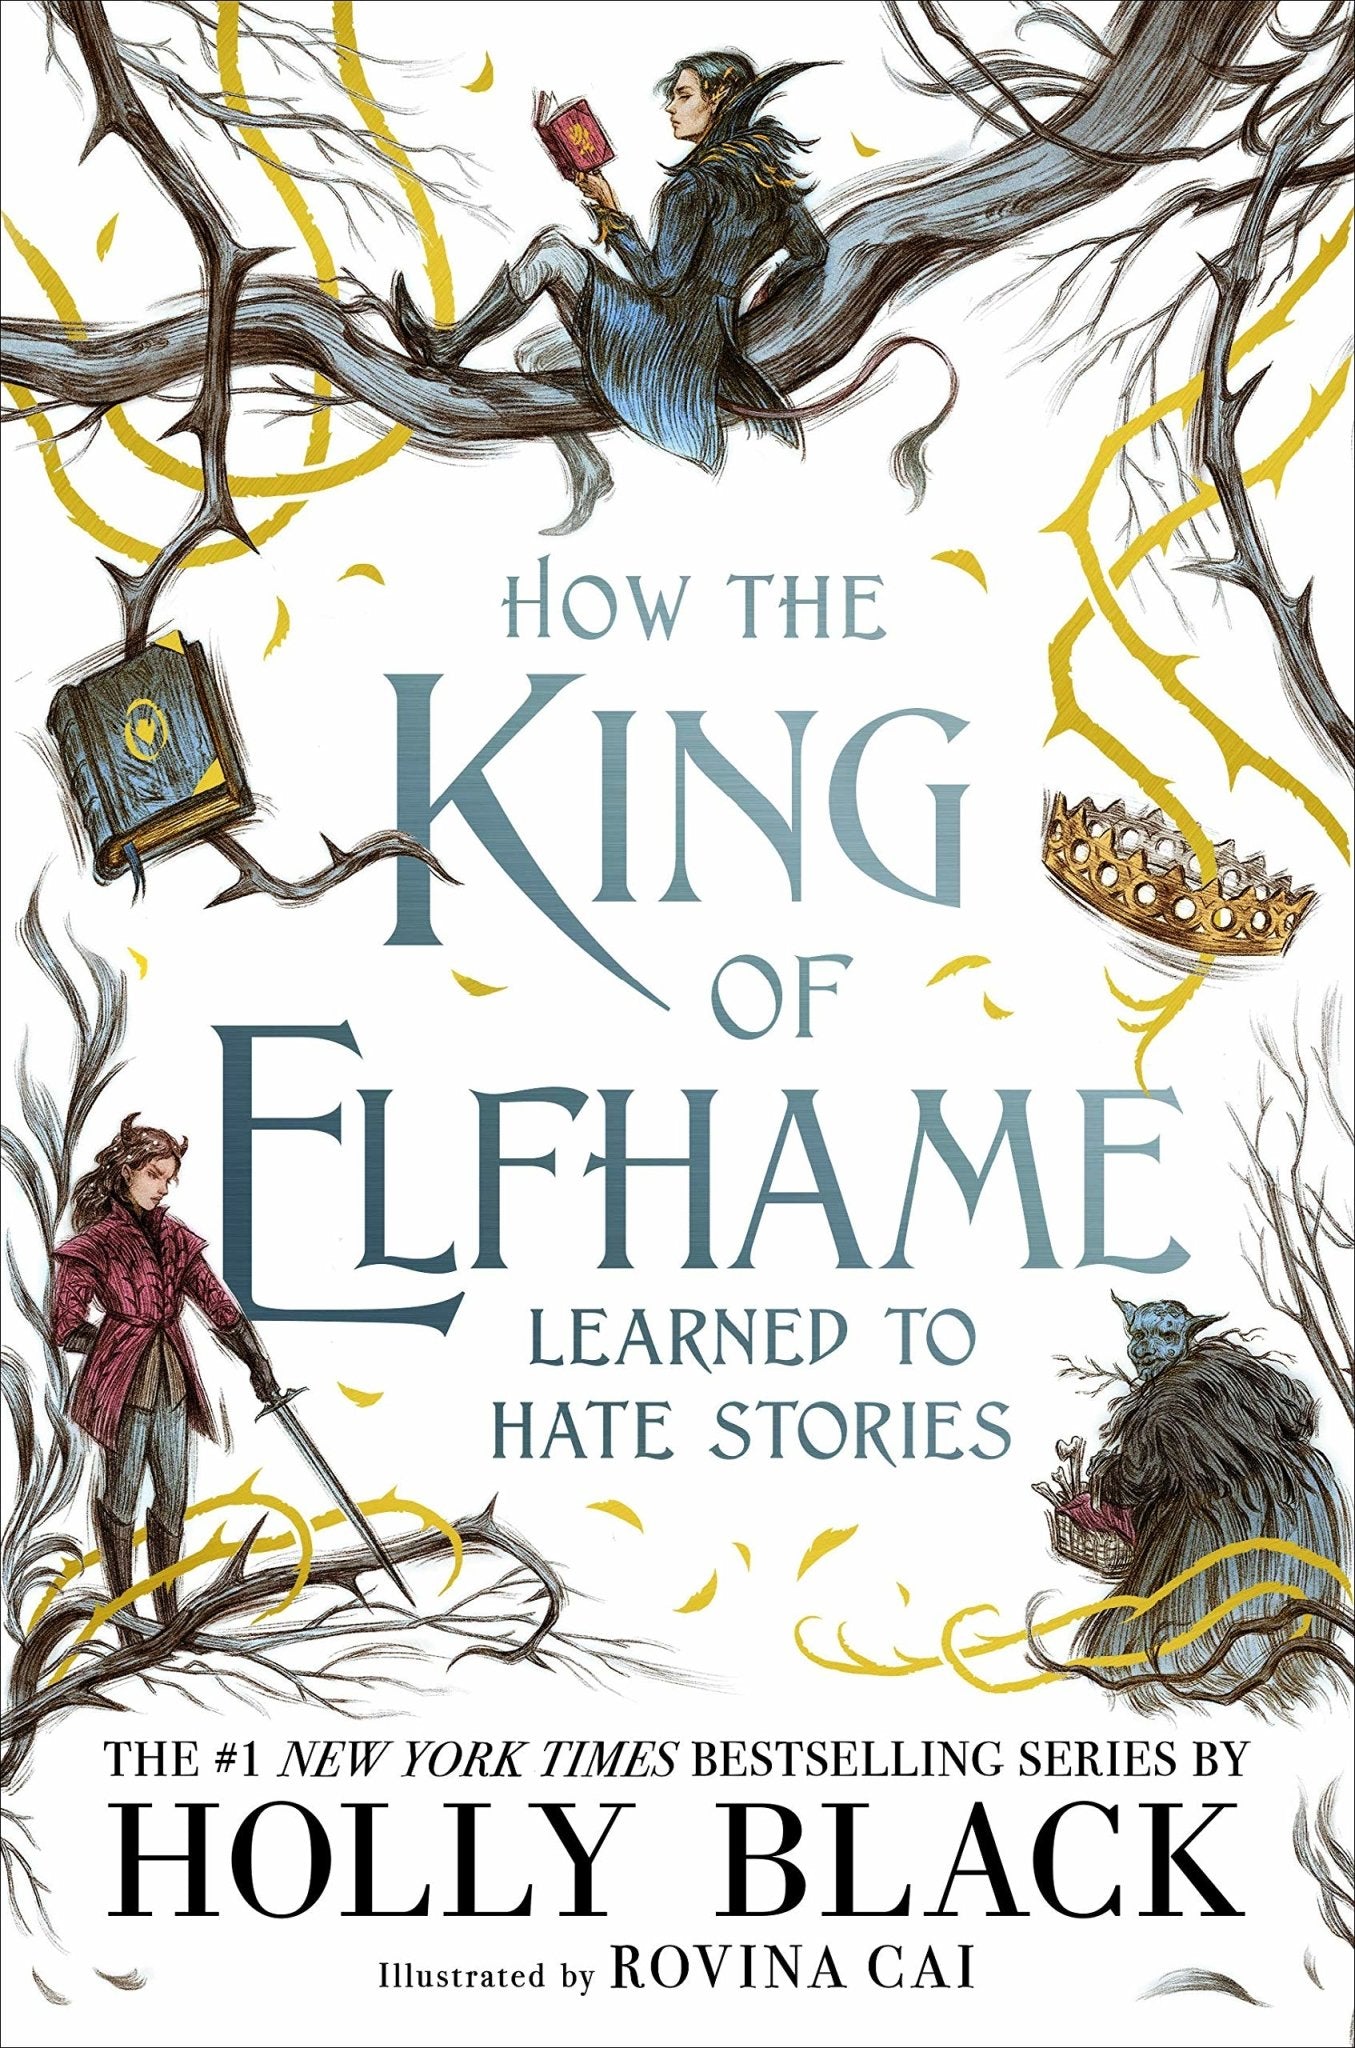 How the King of Elfhame Learned to Hate Stories ( Folk of the Air ) by Holly Black [Hardcover] - LV'S Global Media